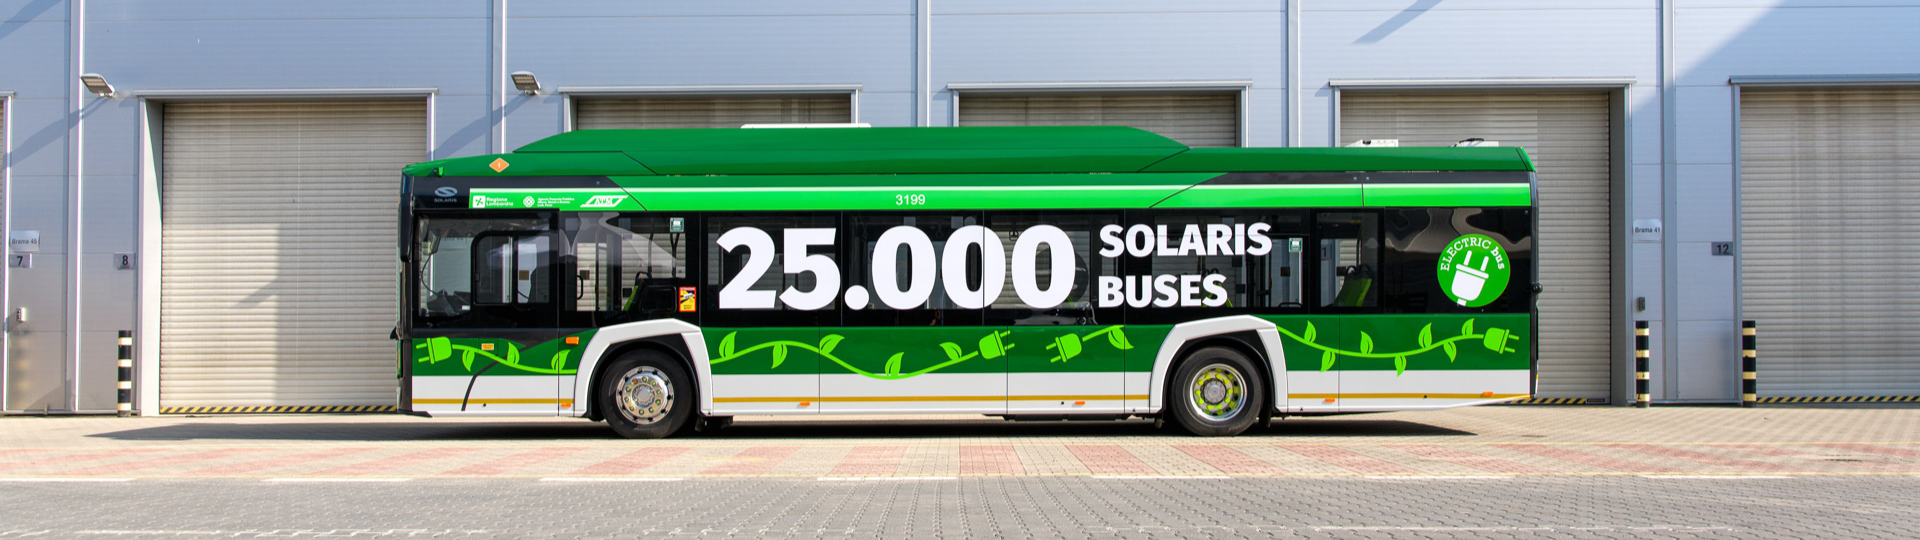 Solaris celebrates: 25,000 vehicles produced and the 25th anniversary of the launch of the Urbino brand